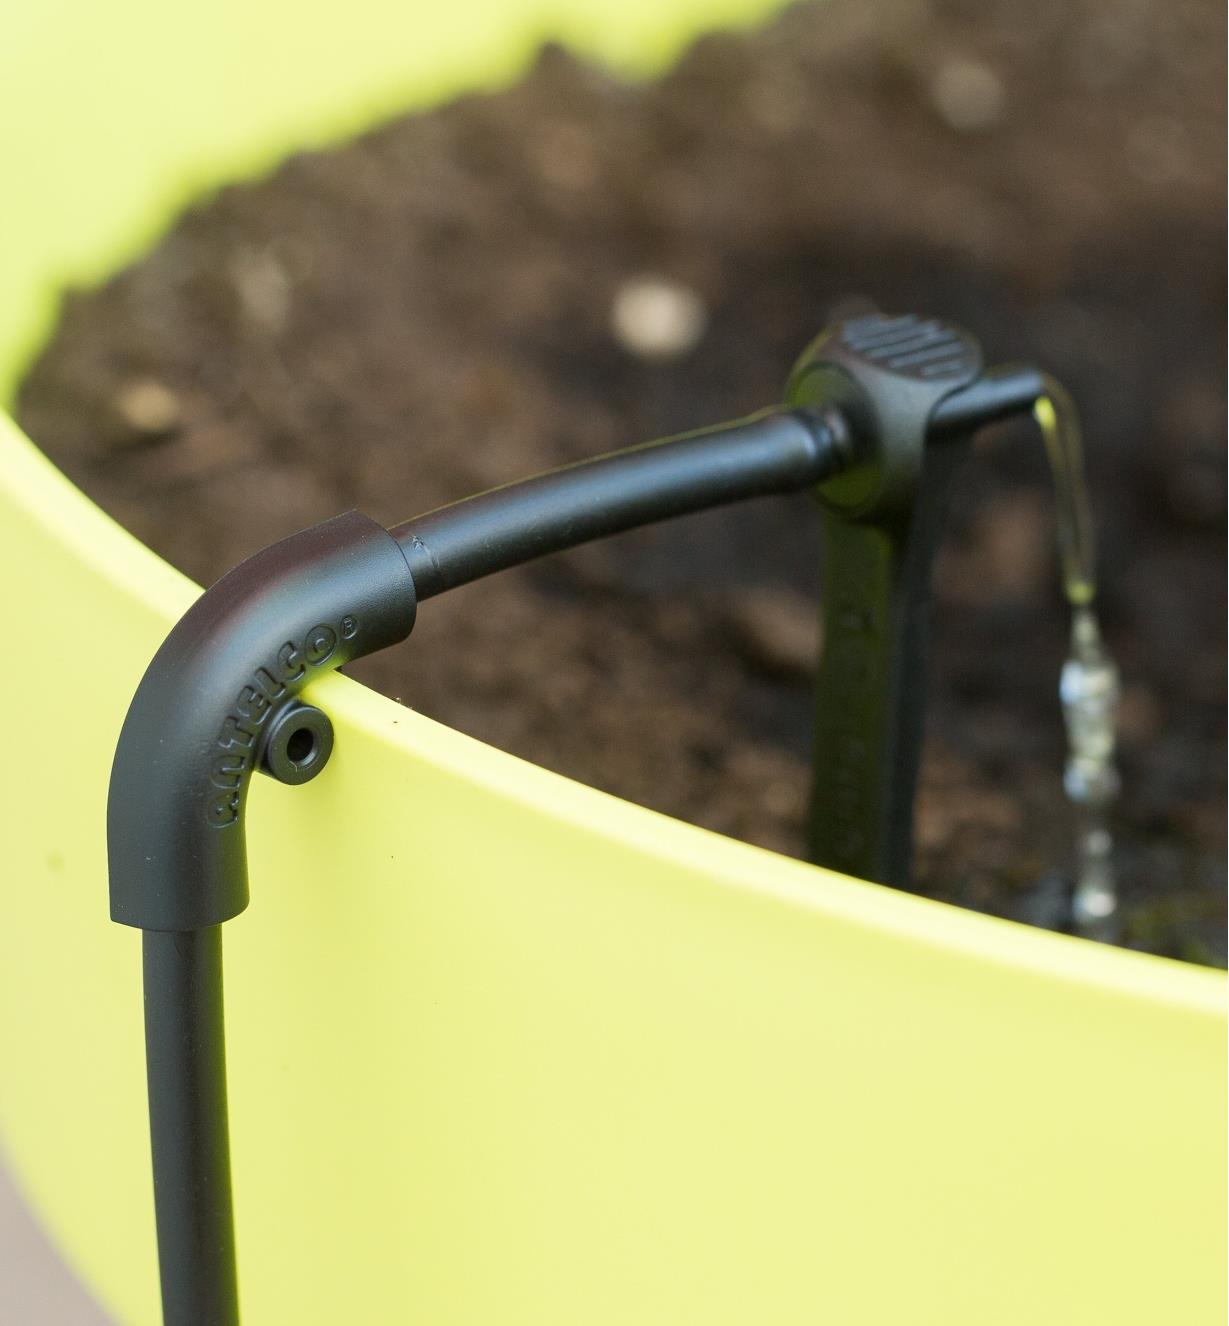 Clip-on elbow fitted onto irrigation hose and mounted to the edge of a planter